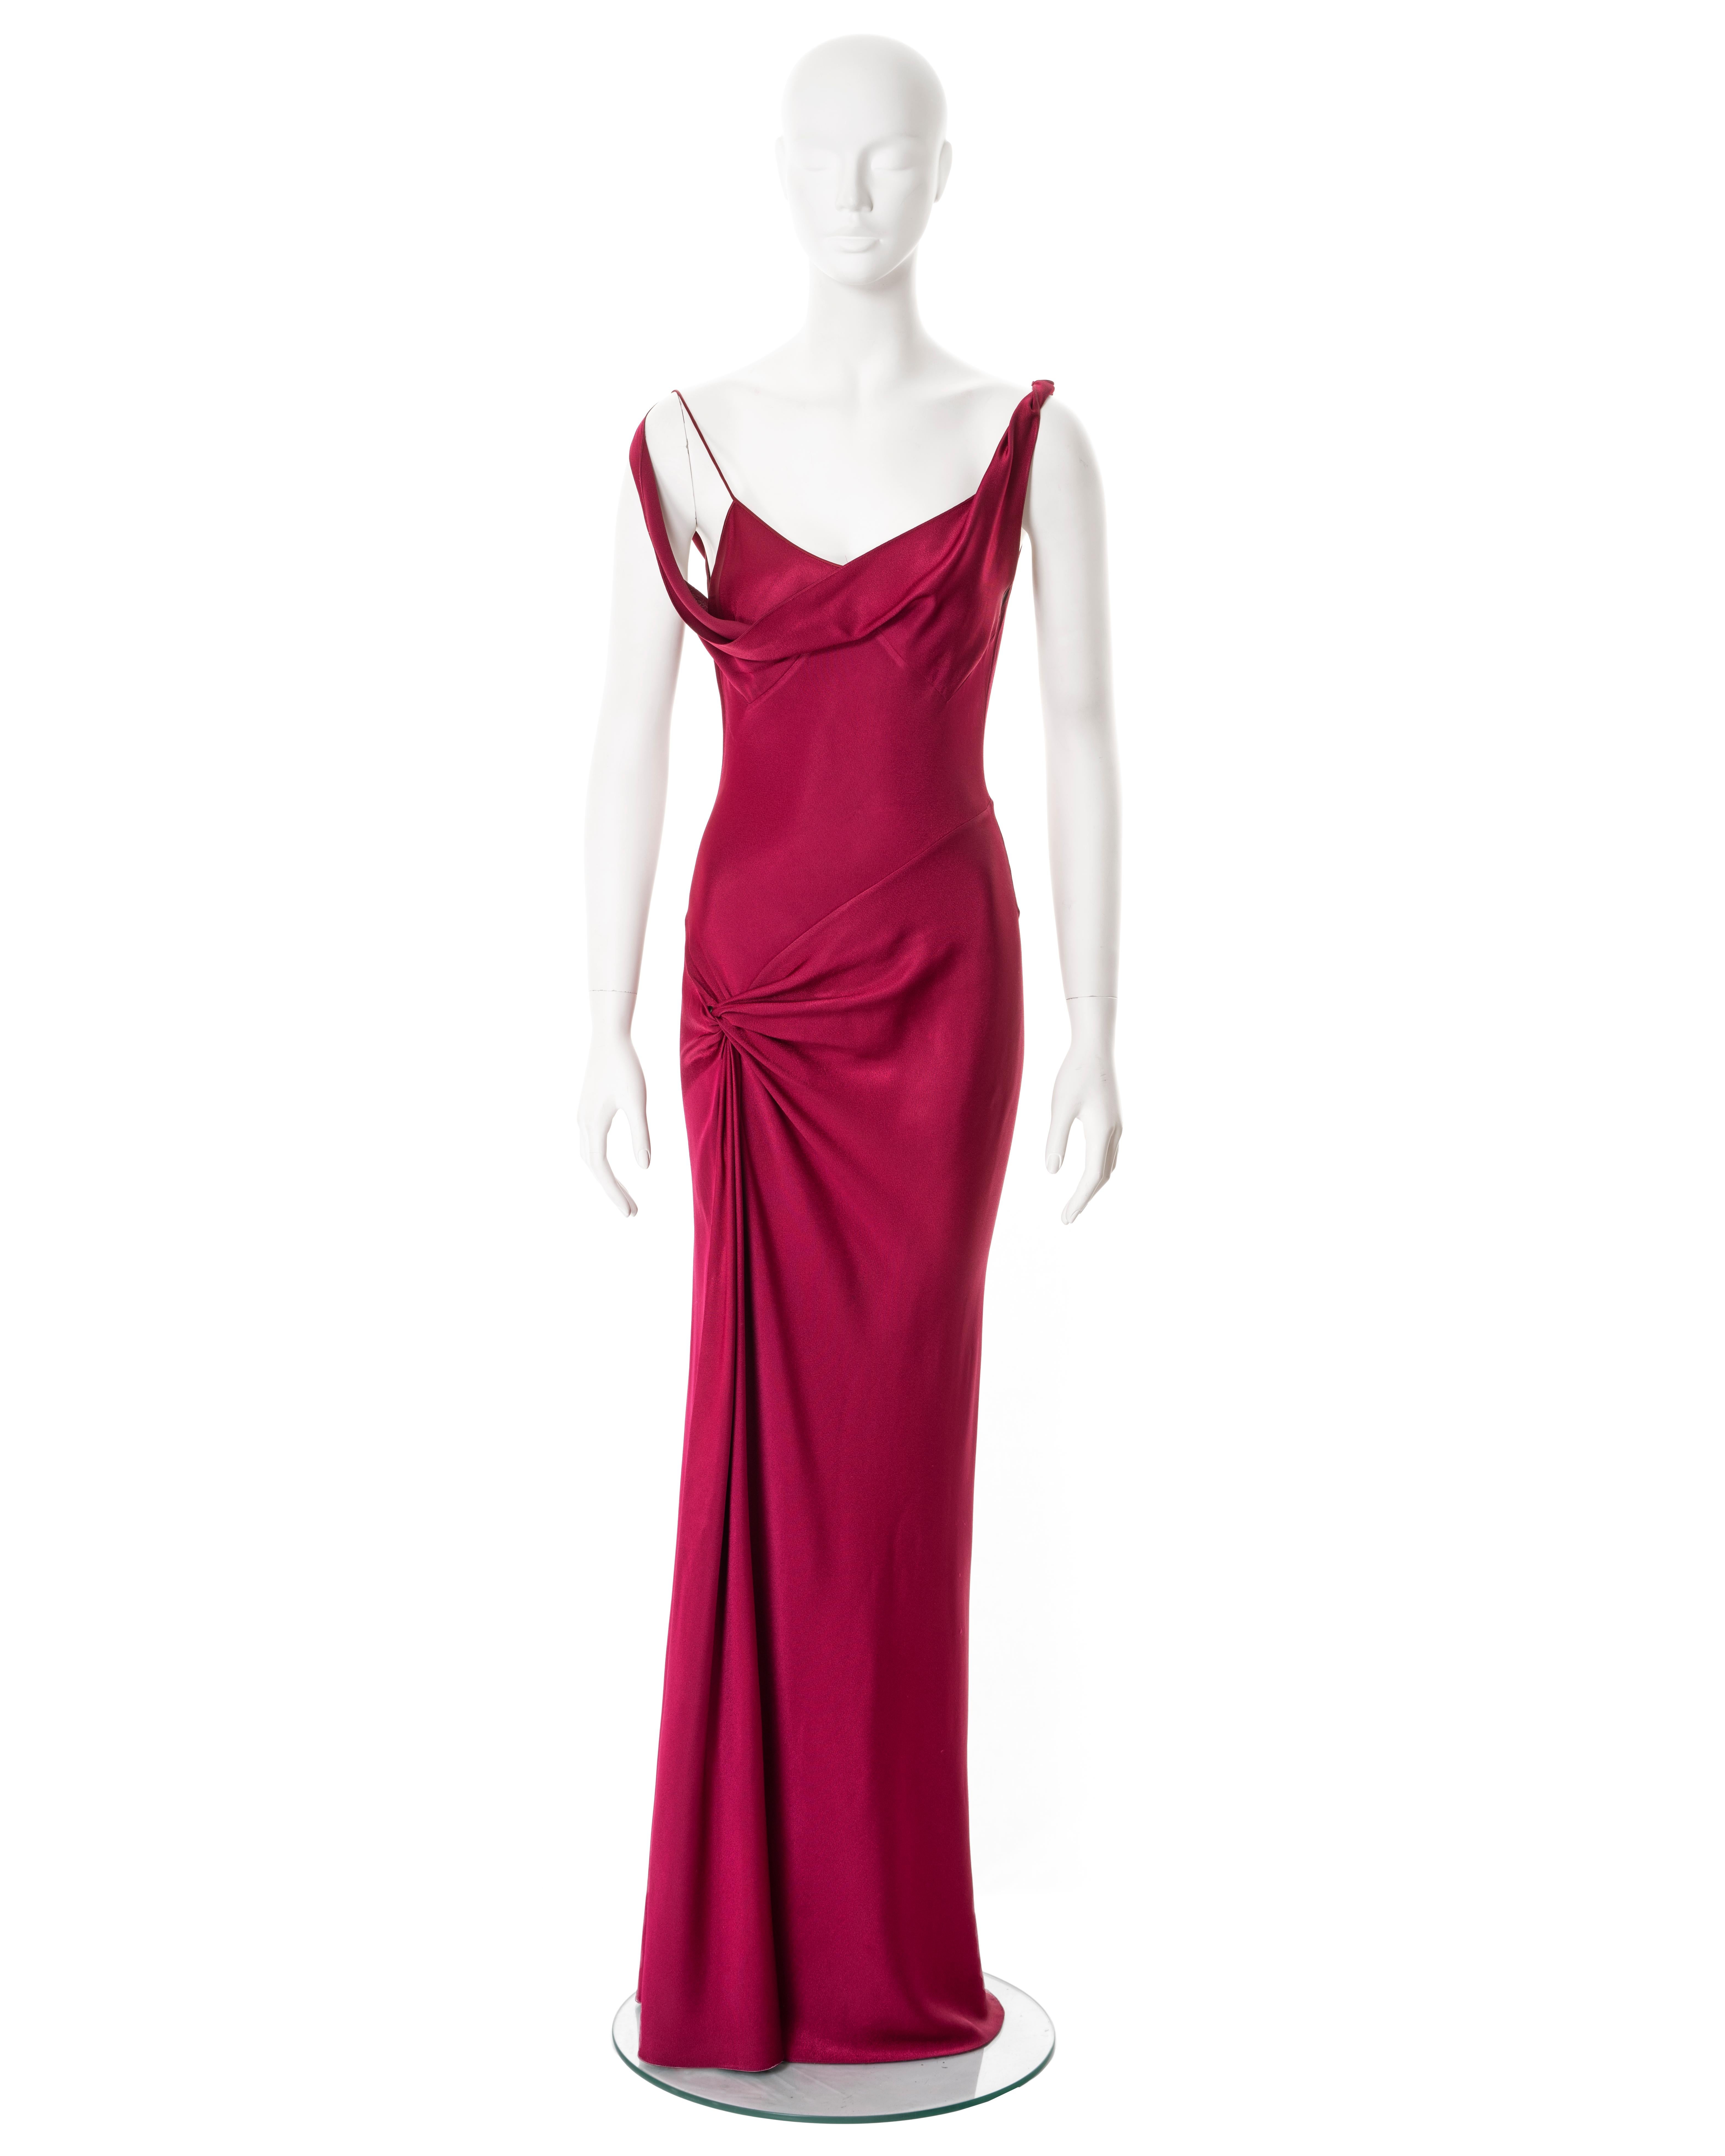 ▪ John Galliano evening dress
▪ Sold by One of a Kind Archive
▪ Fall-Winter 1999
▪ Constructed from crimson bias-cut crêpe backed satin
▪ Bodice with v-neck and spaghetti straps and draped cowl overlay with twisted off-shoulder straps 
▪ Knot detail